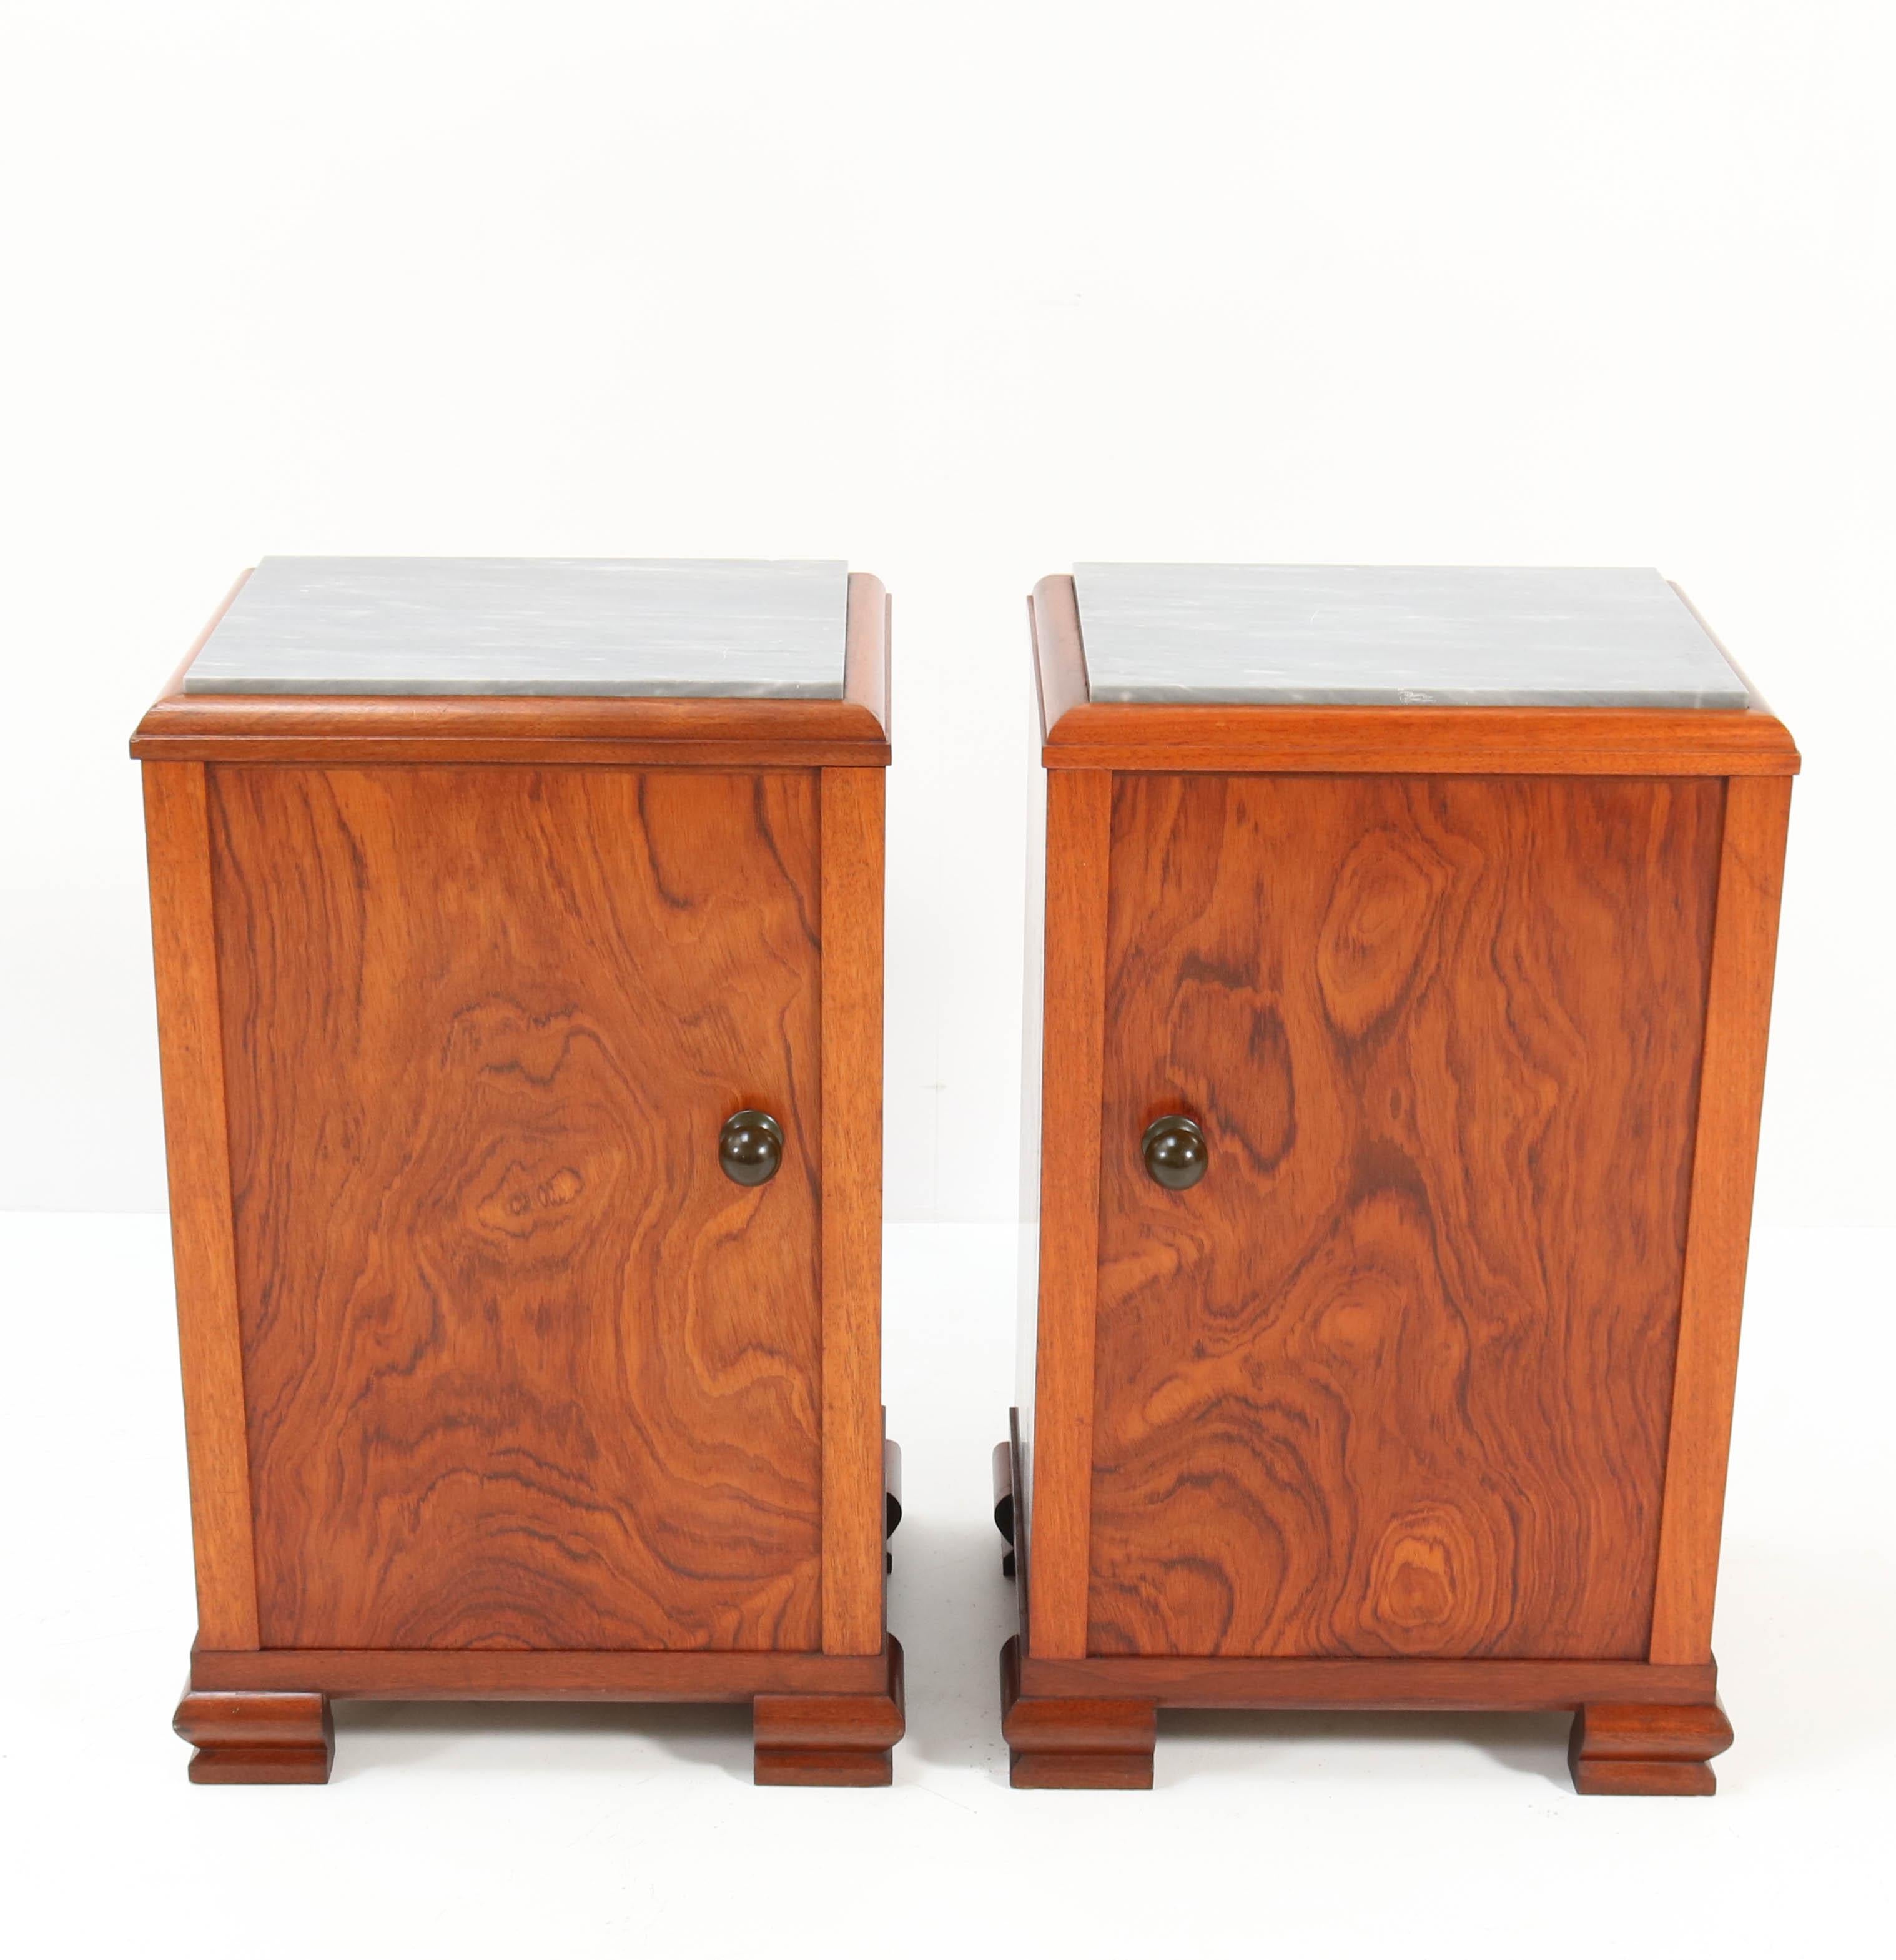 Wonderful pair of Art Deco nightstands or bedside tables.
Striking French design from the 1930s.
Solid walnut and walnut veneer with original patinated brass knobs.
Original grey marble tops.
In very good condition with a beautiful patina.